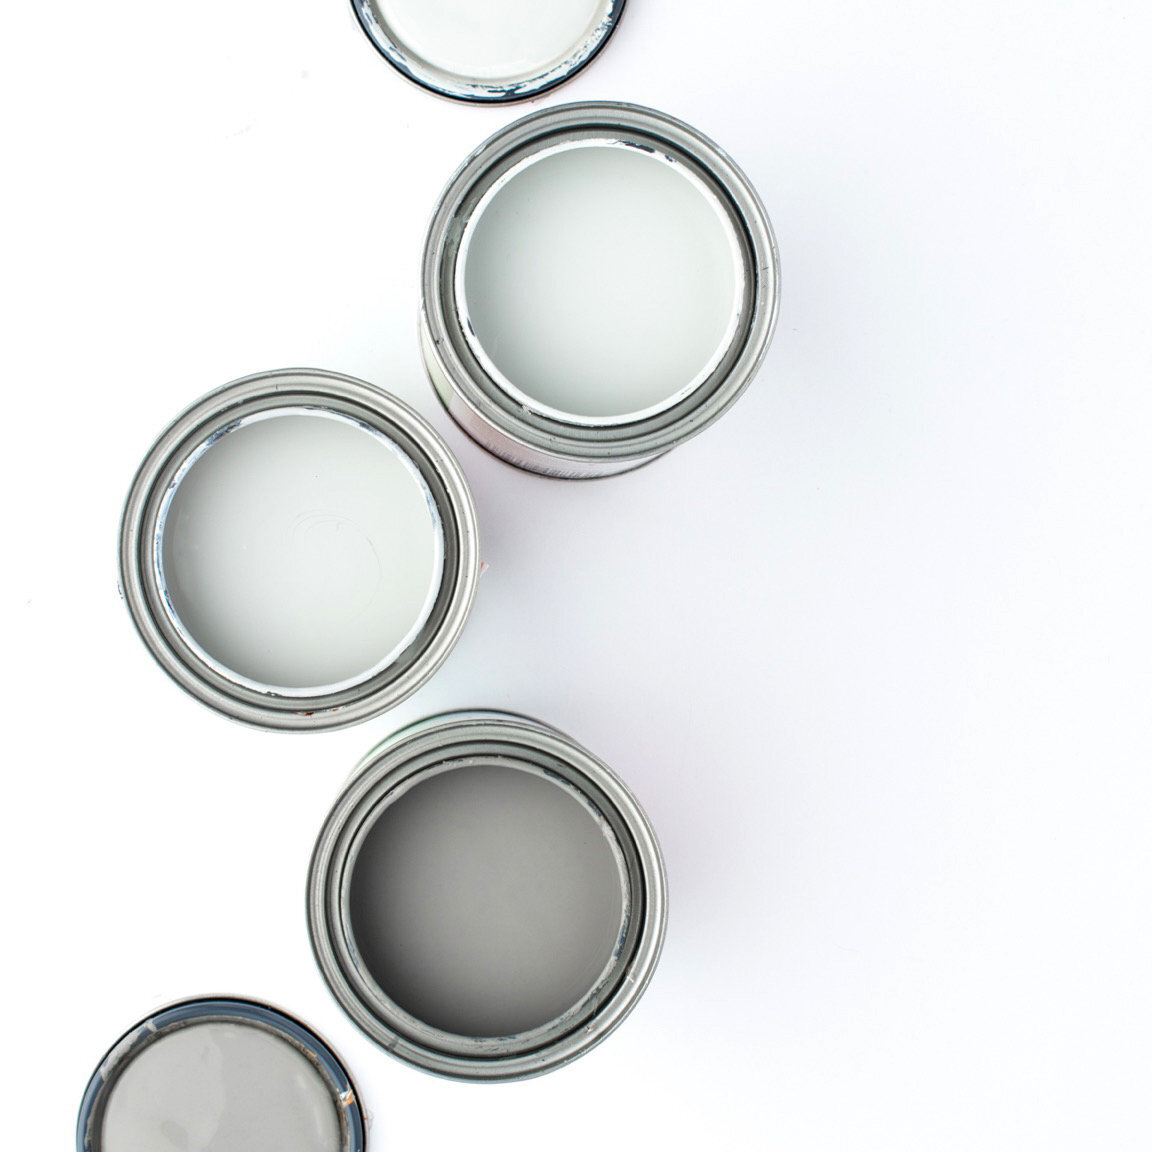 open cans of grey paints options on white background